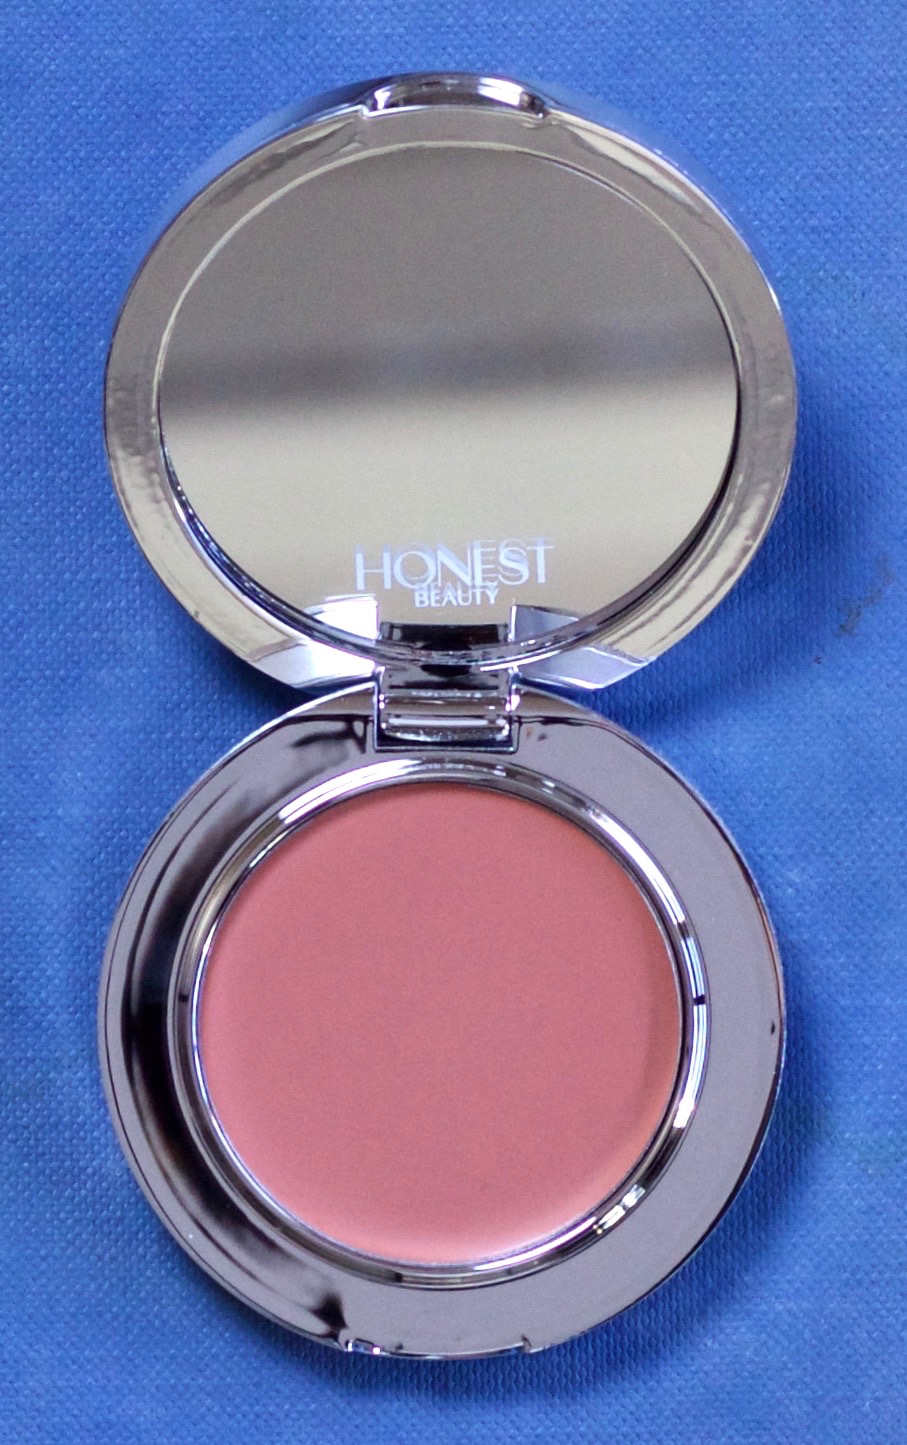 What really got me excited about this blush are the 6 shades it’s offered in. My shade, Truly Exciting, is a pink rose. It’s no problem for you to find your own perfect shade on Honest’s website. They show each blush color on an array of models with diverse skin tones.